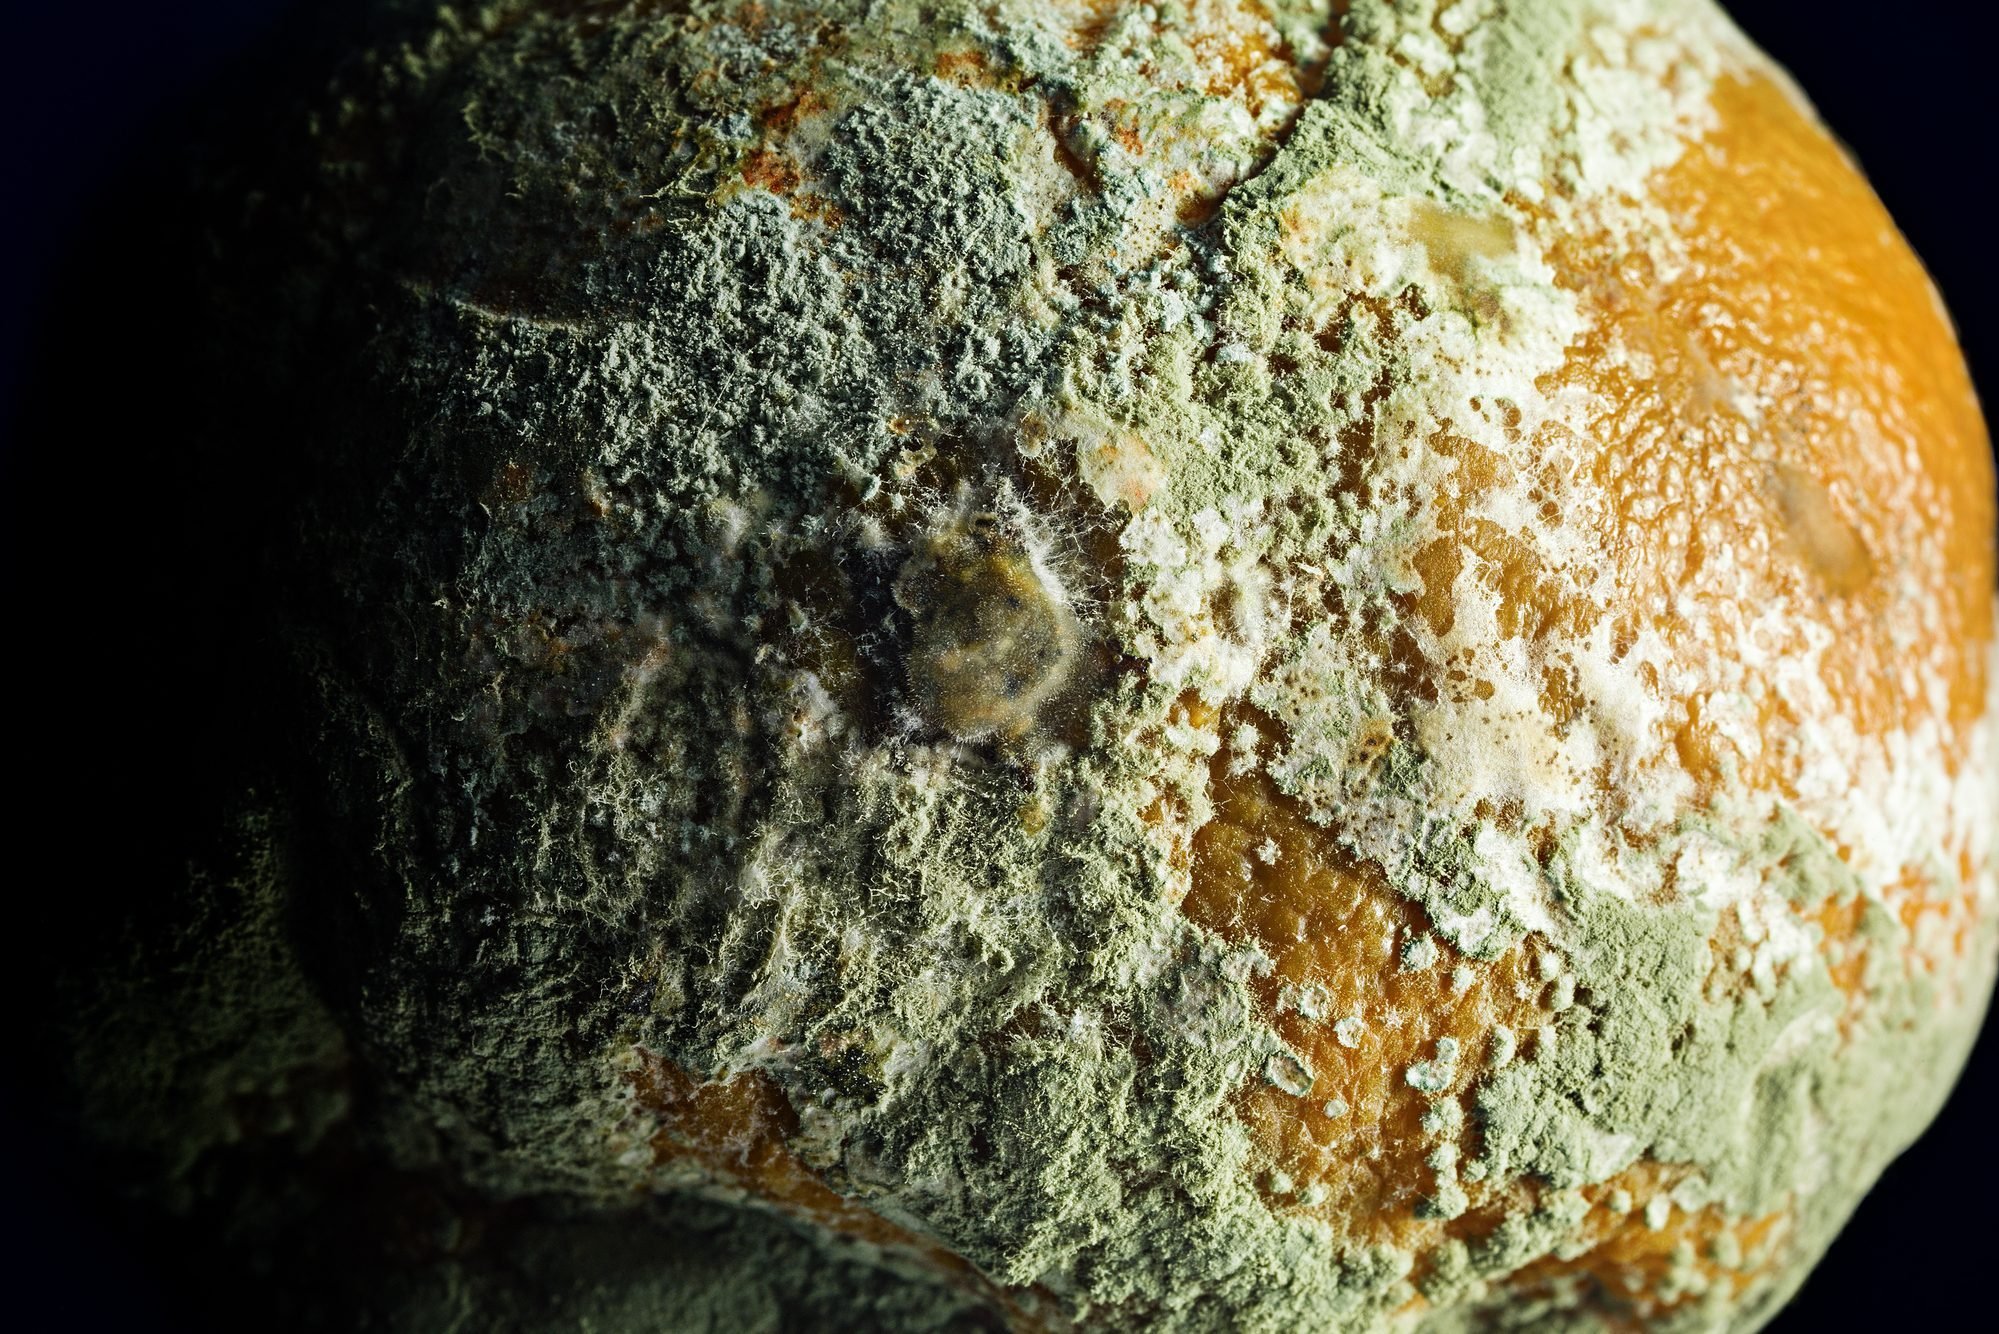 5 Silent Signs You're Being Exposed to Mold